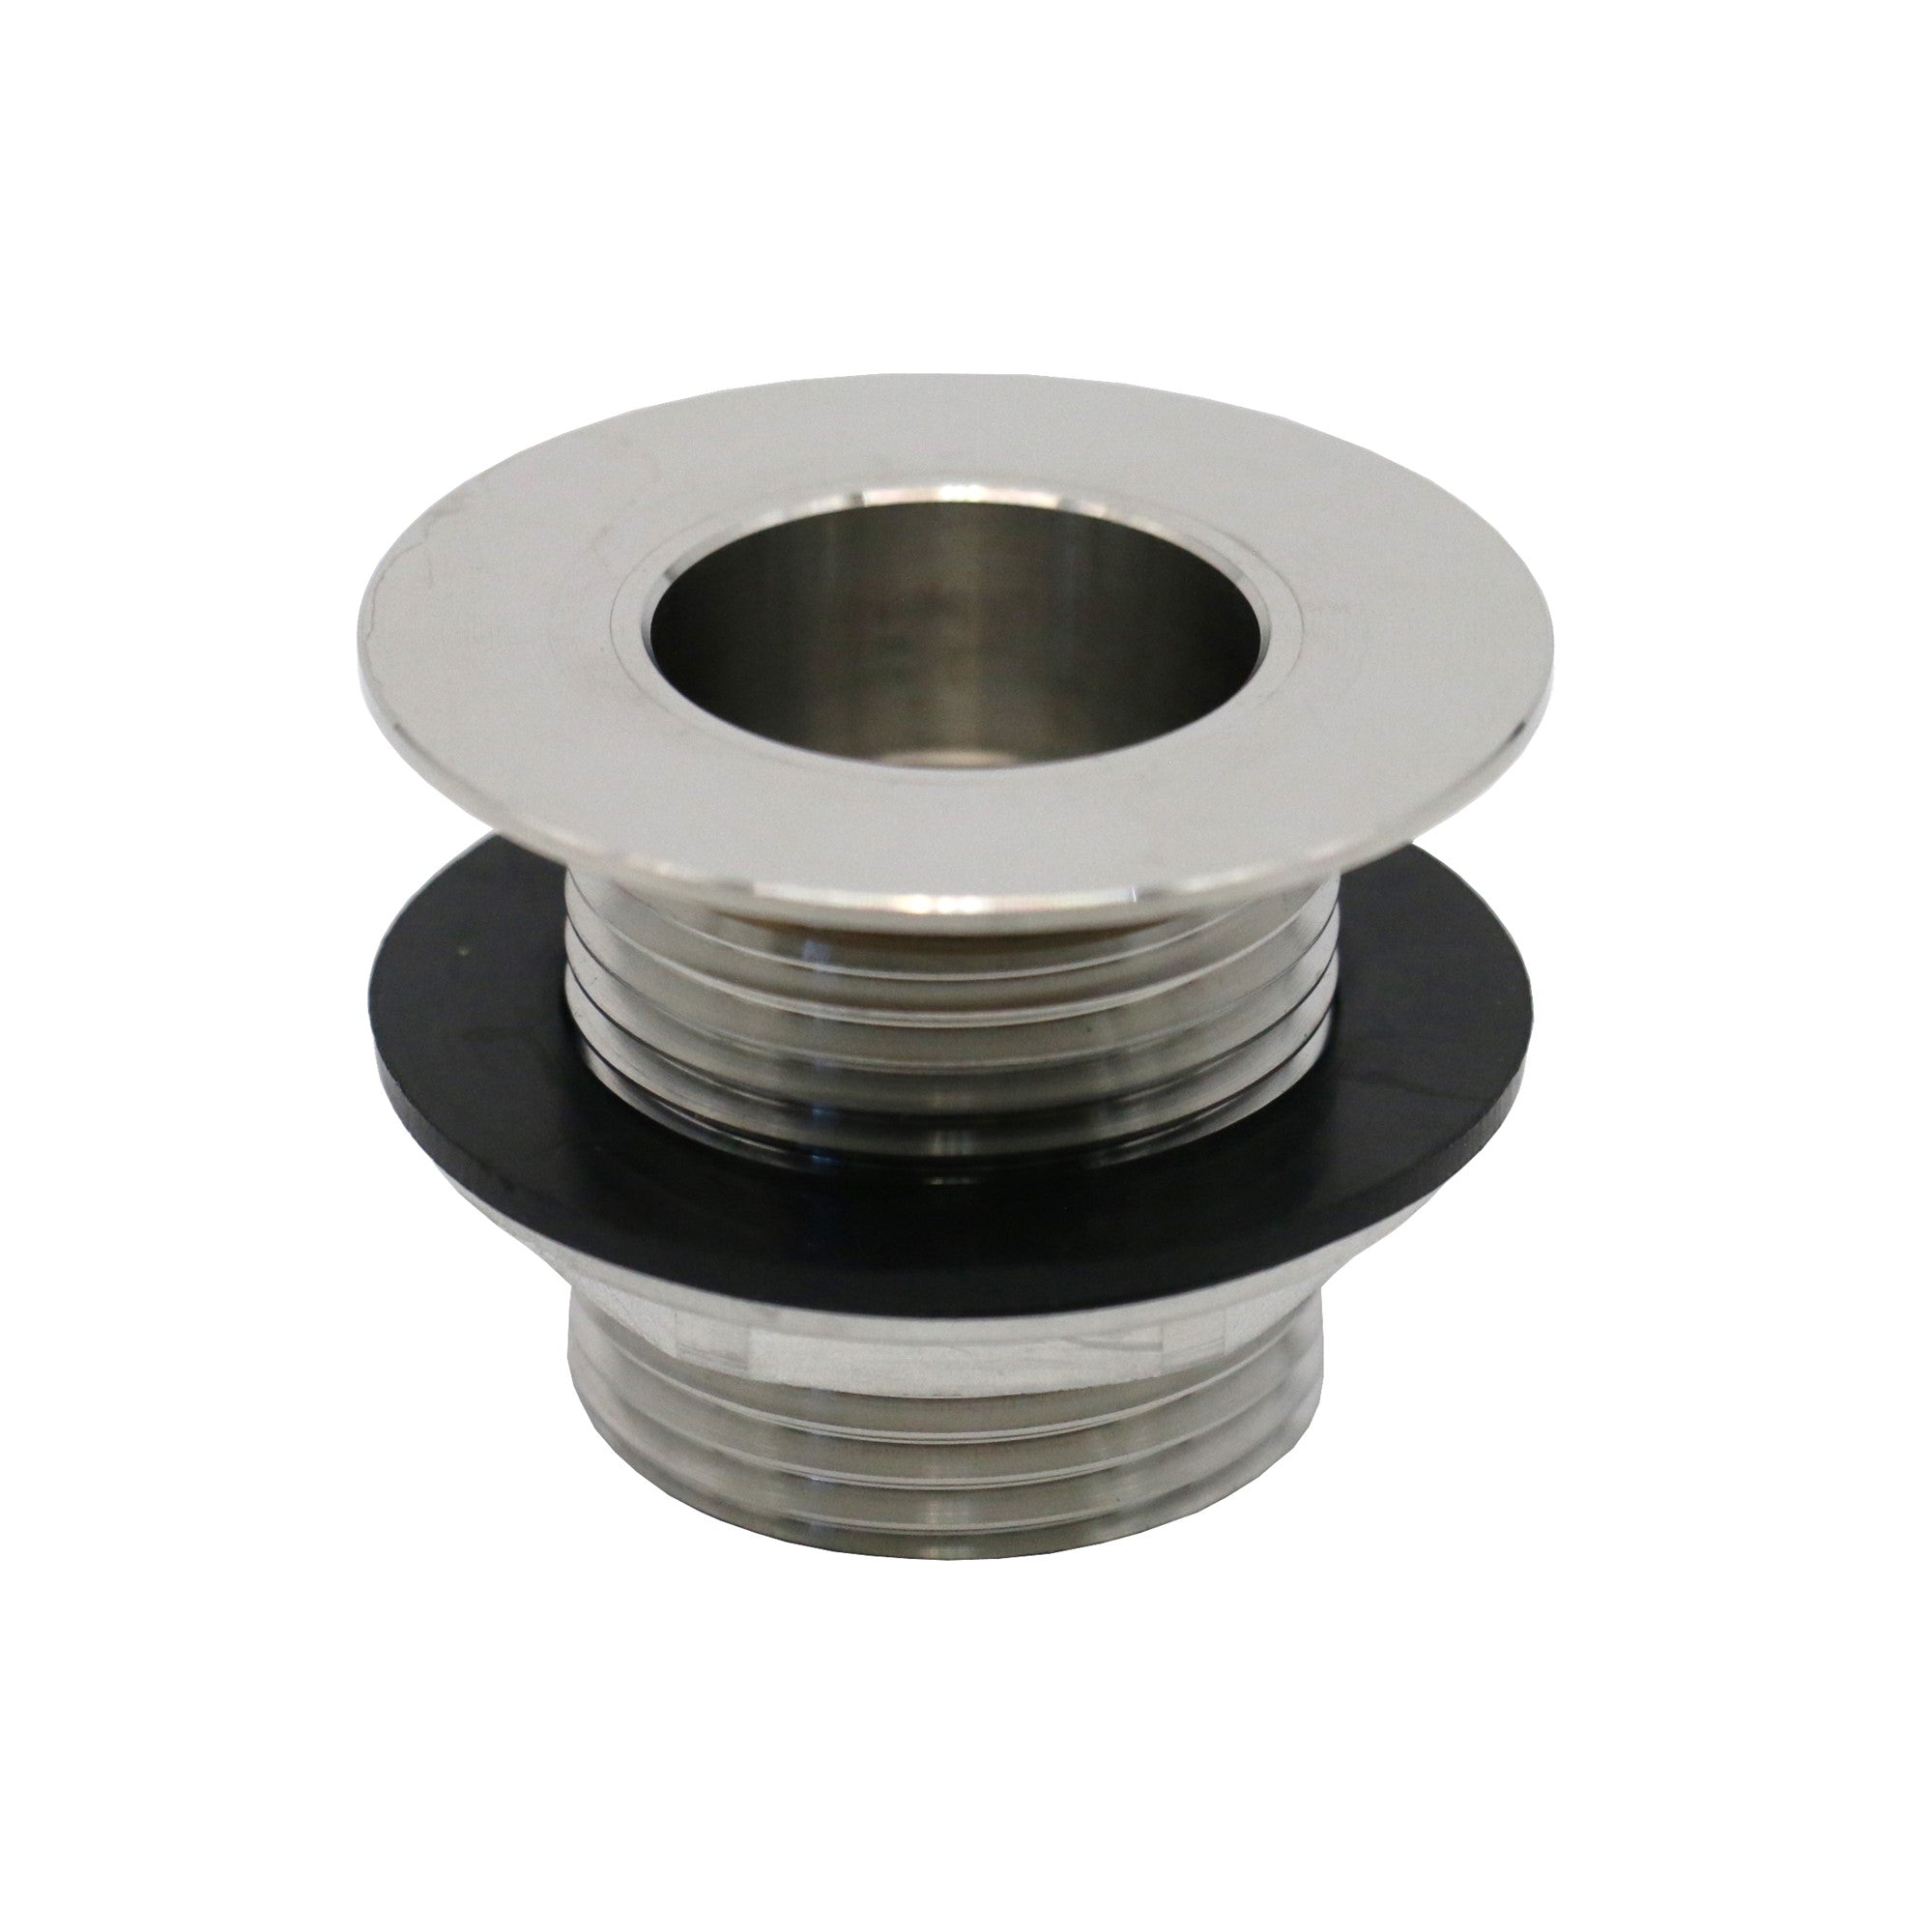 Leyso AA-143 Stainless Steel Bar Sink Drain 1" Nominal Pipe Size 1" NPS Thread for 1-3/8" Sink Opening (1-1/2" Length)